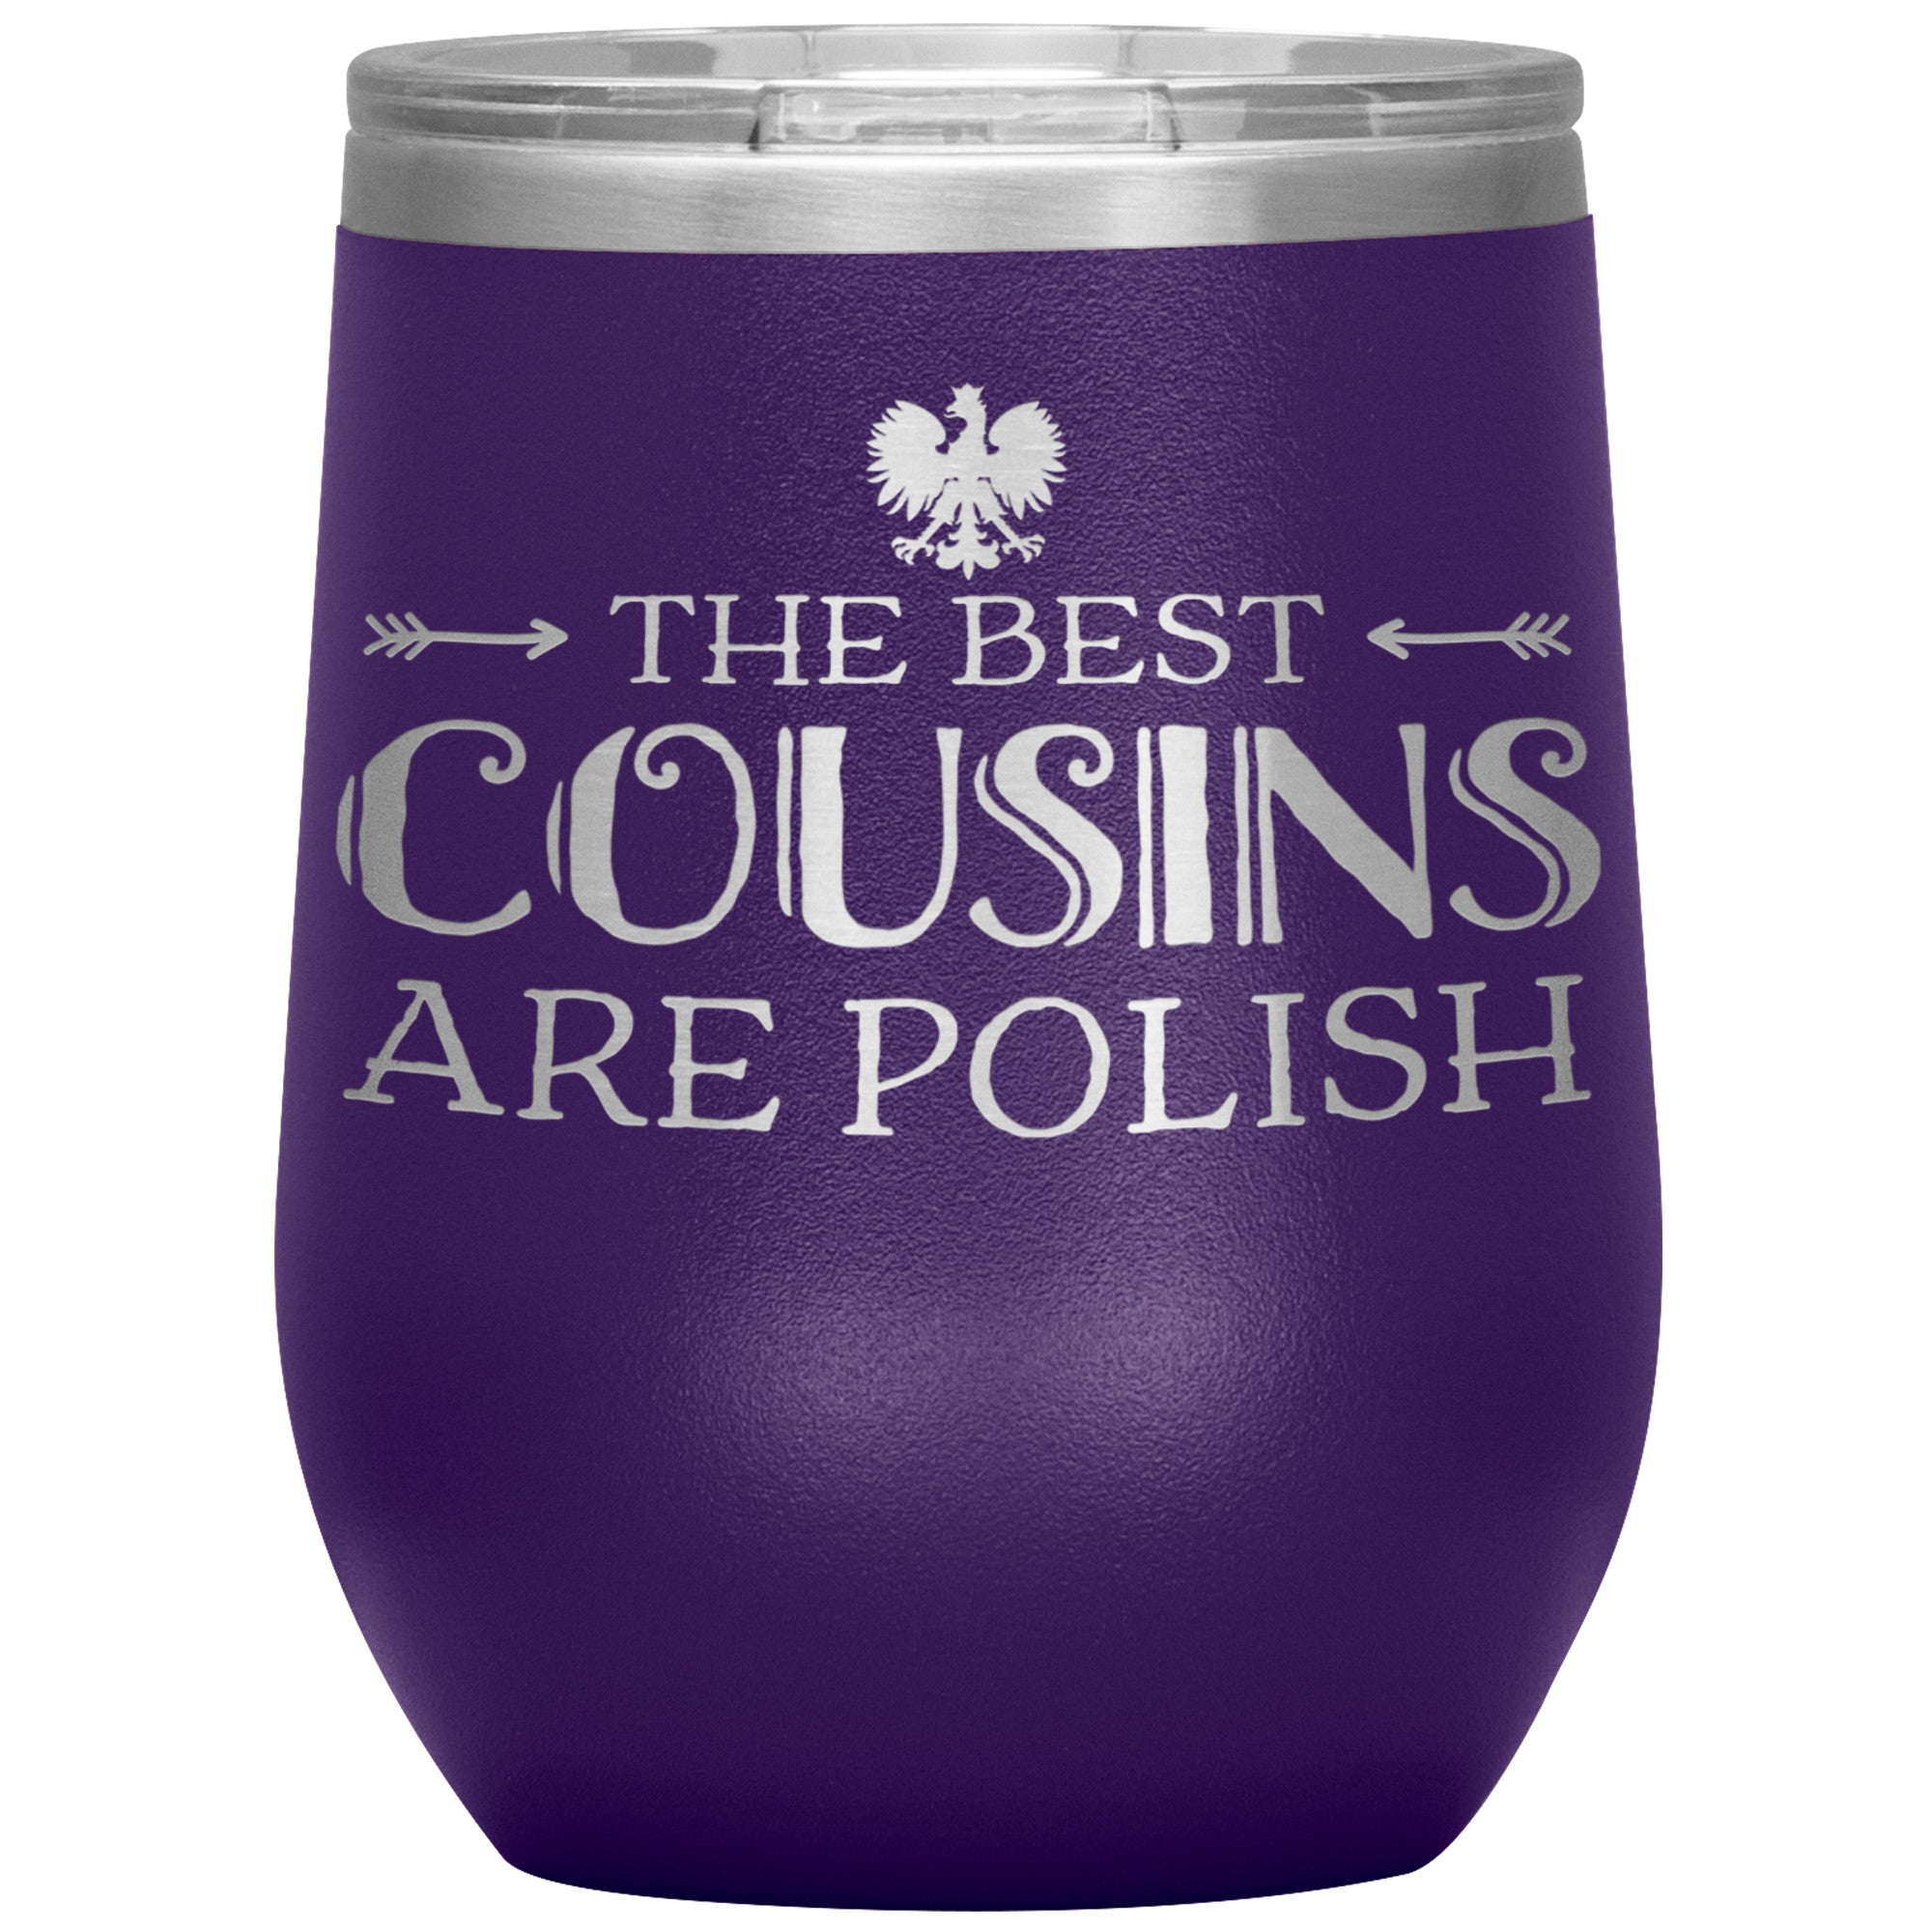 The Best Cousins Are Polish Insulated Wine Tumbler Tumblers teelaunch Purple  